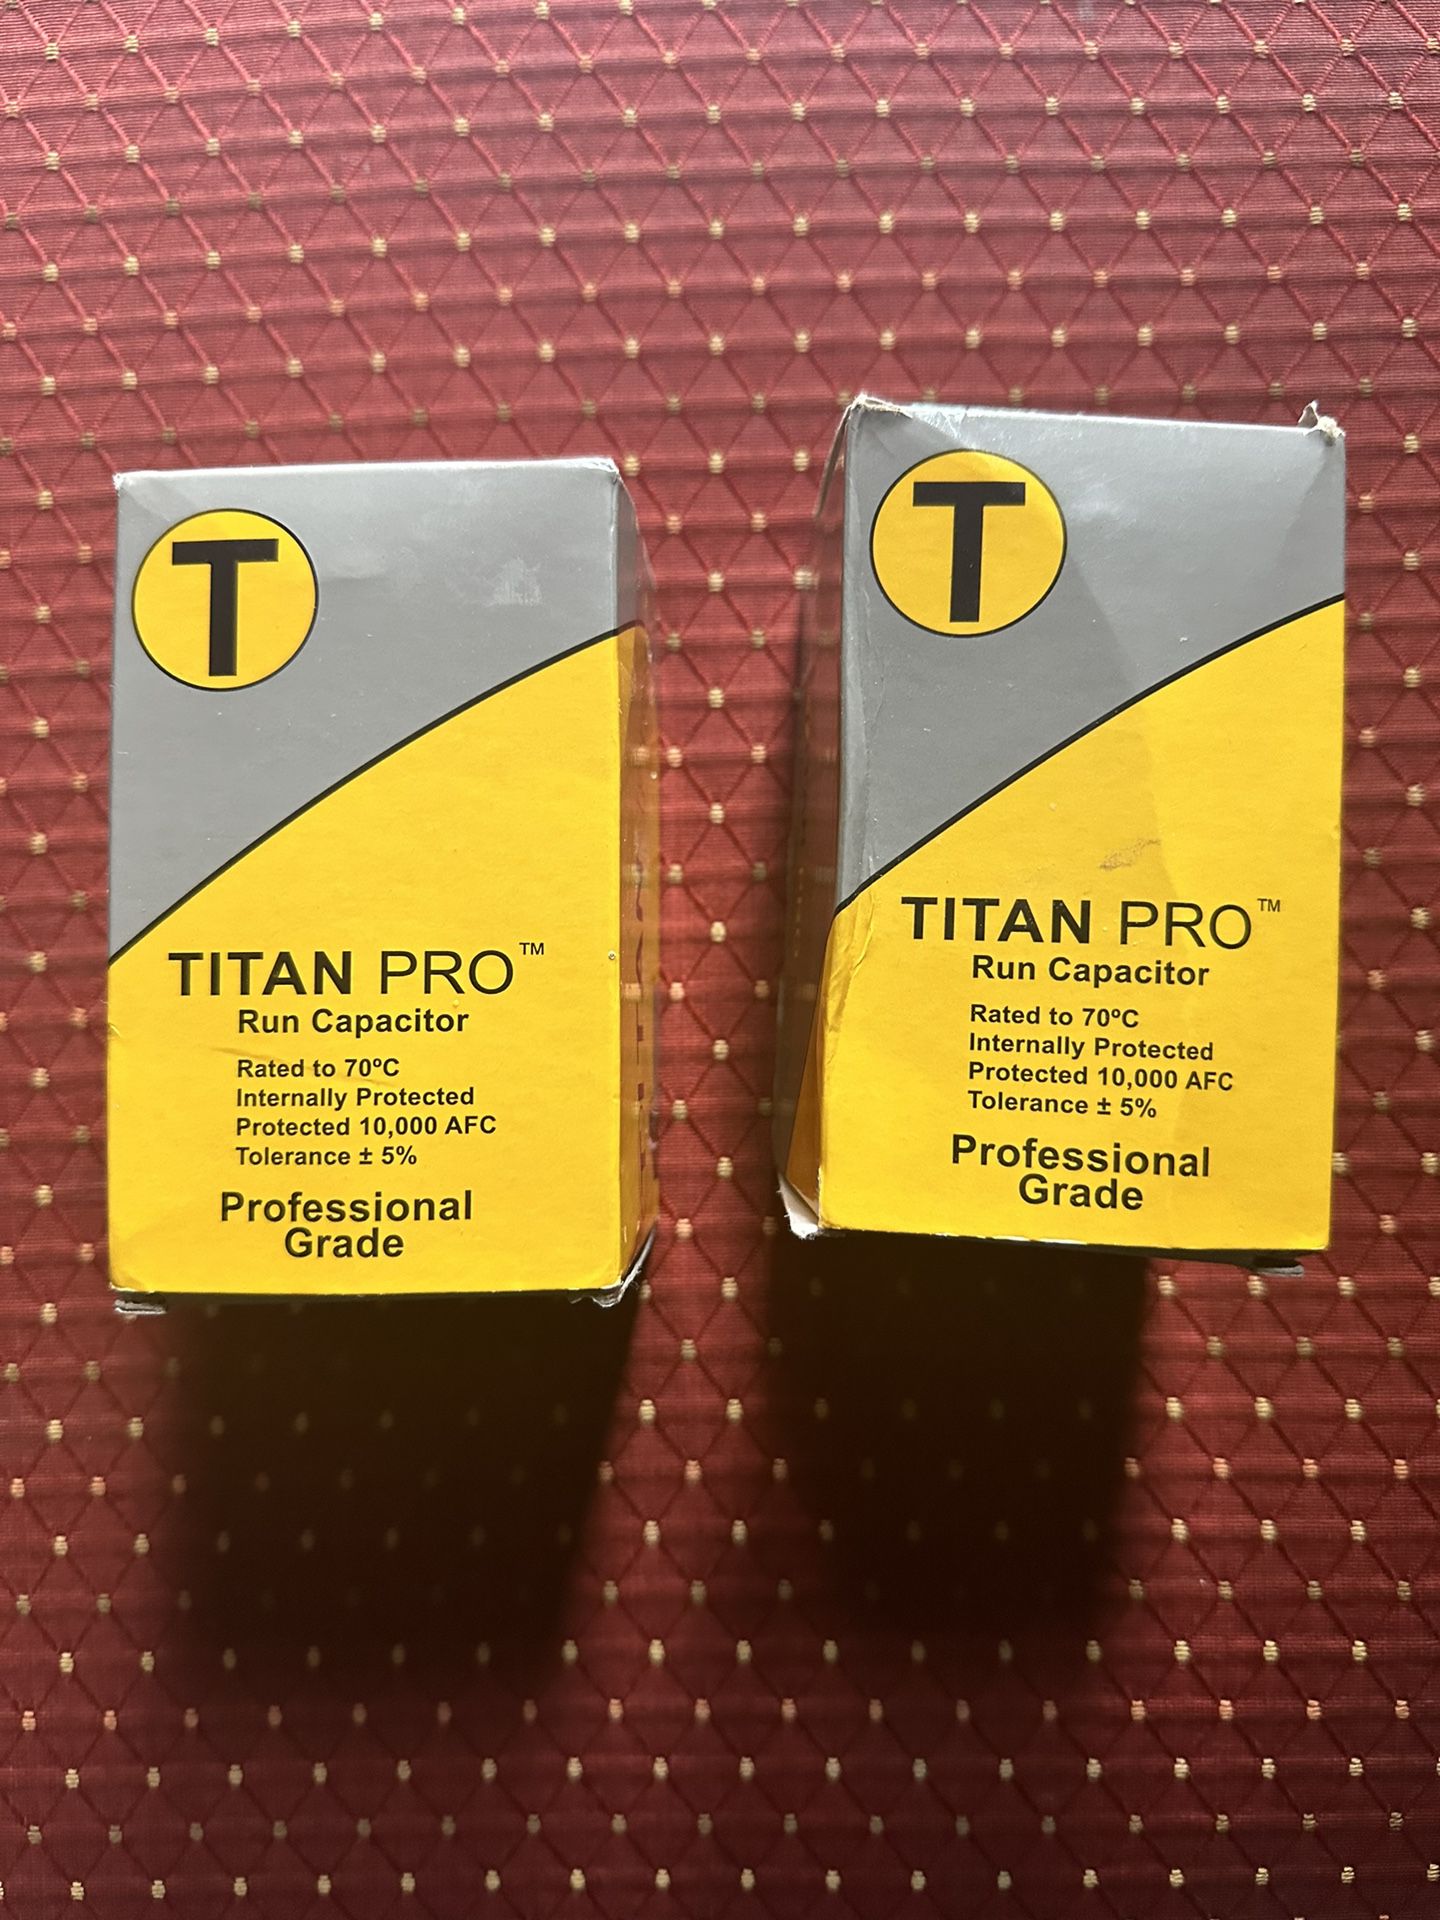 Titan Pro Run Capacitor NEW IN BOX Professional Grade Packard TRCFD455  For HVAC units. $10 For 1 Or BOTH for $18